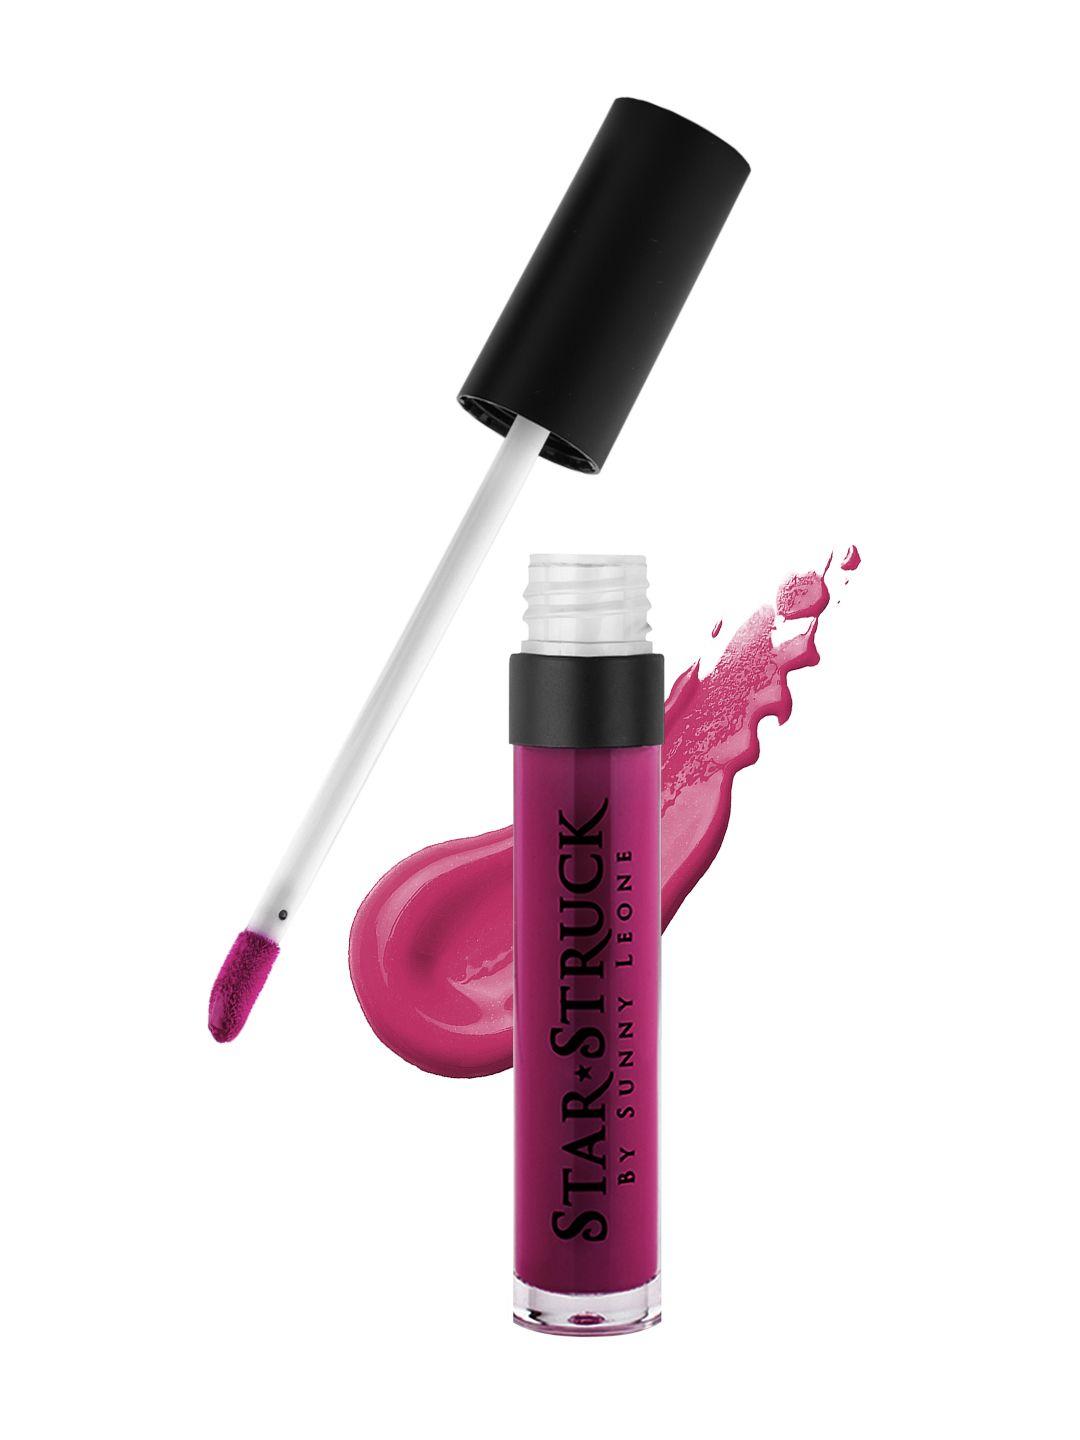 Star Struck by Sunny Leone Liquid Lip Color - Rooberry